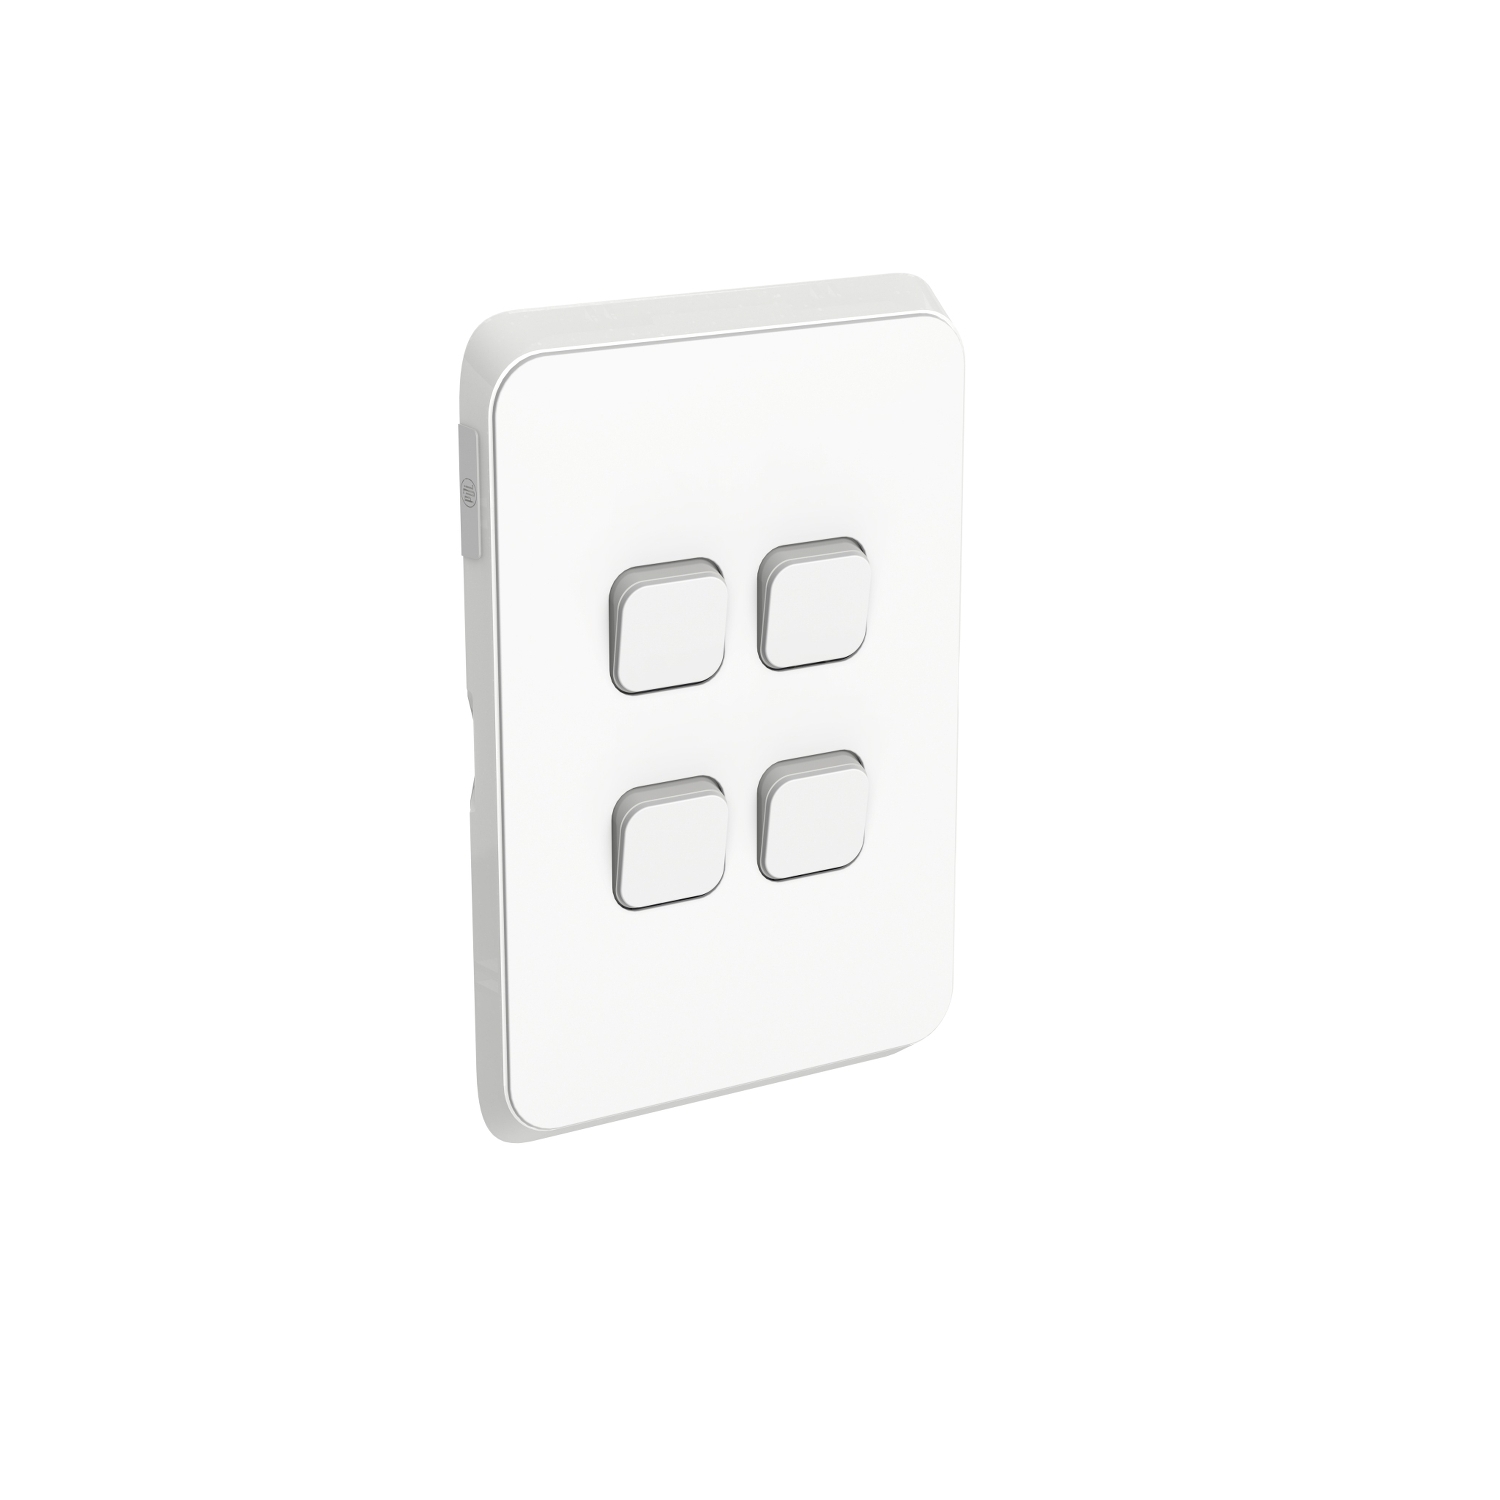 PDL384C-VW - PDL Iconic Cover Plate Switch 4Gang - Vivid White